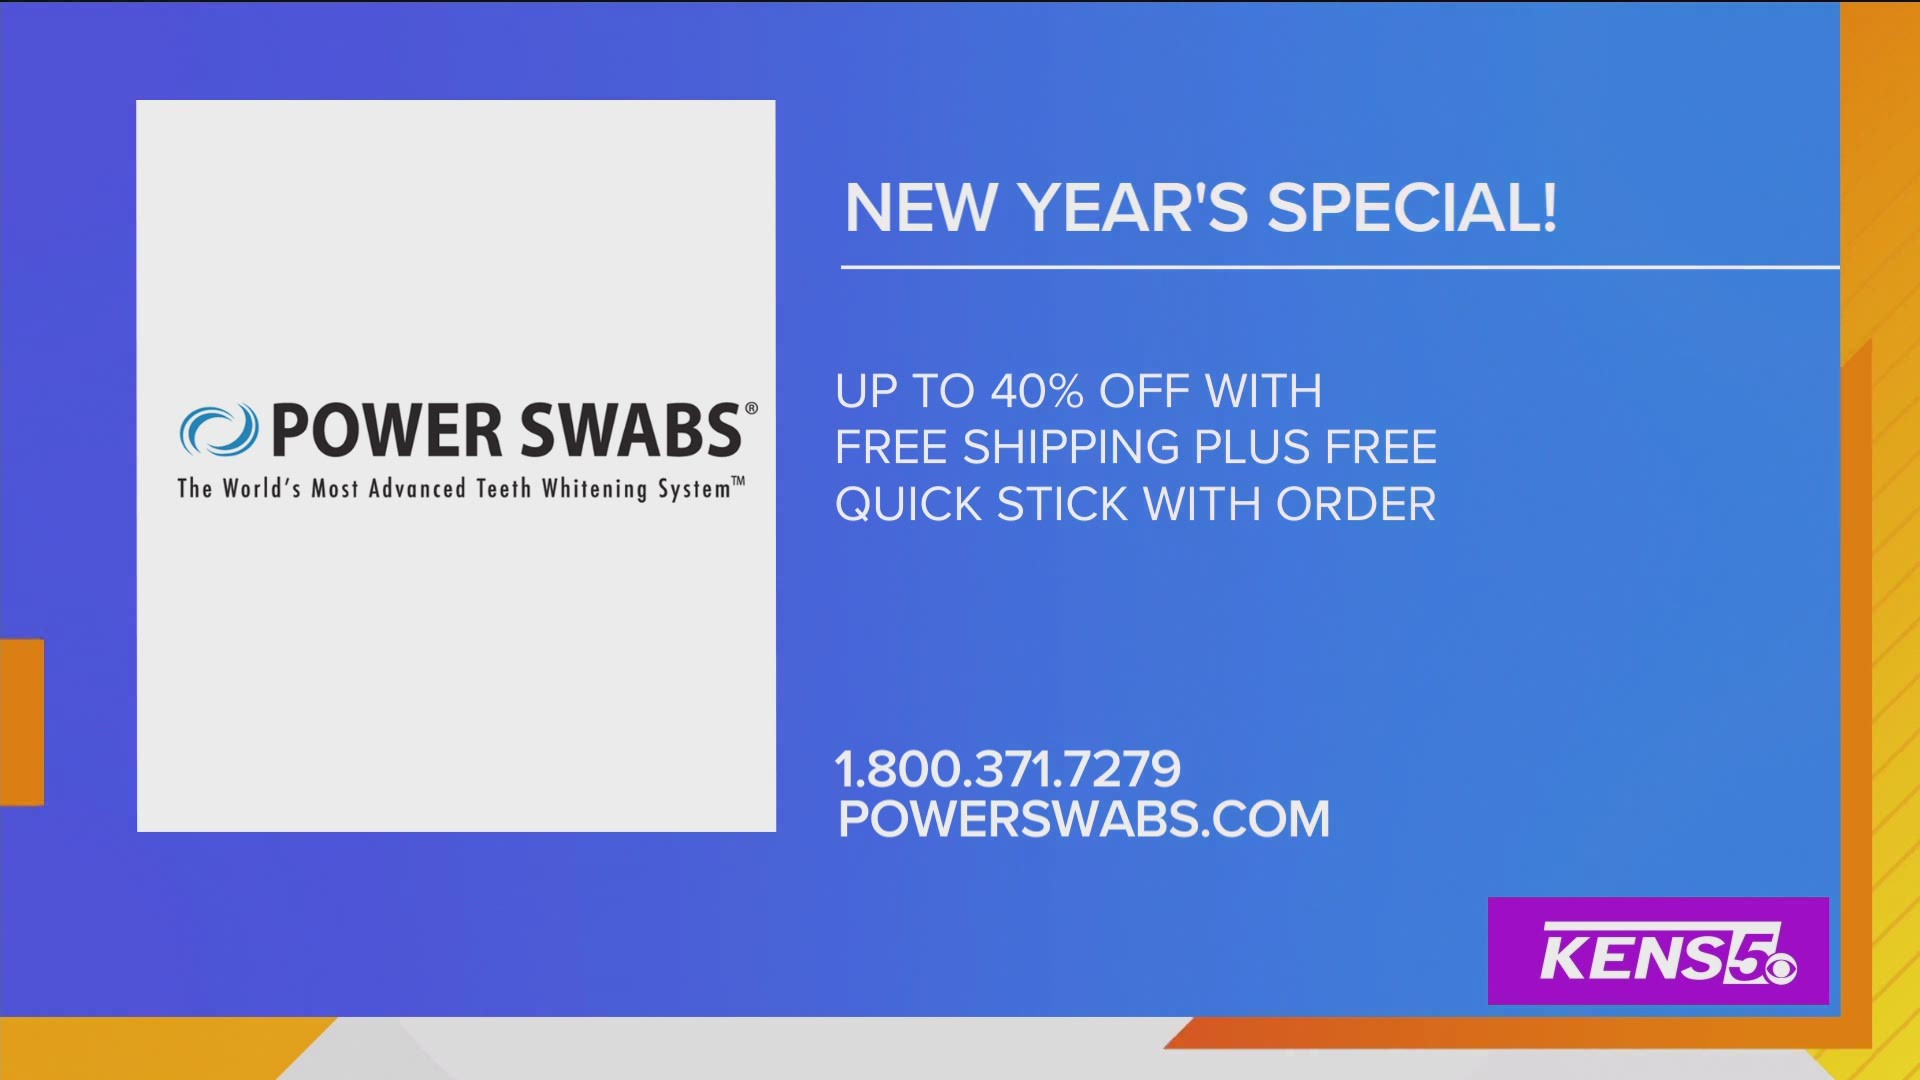 Power Swabs just dropped their New Year's Special. Check out how you can get a brighter smile by visiting powerswabs.com